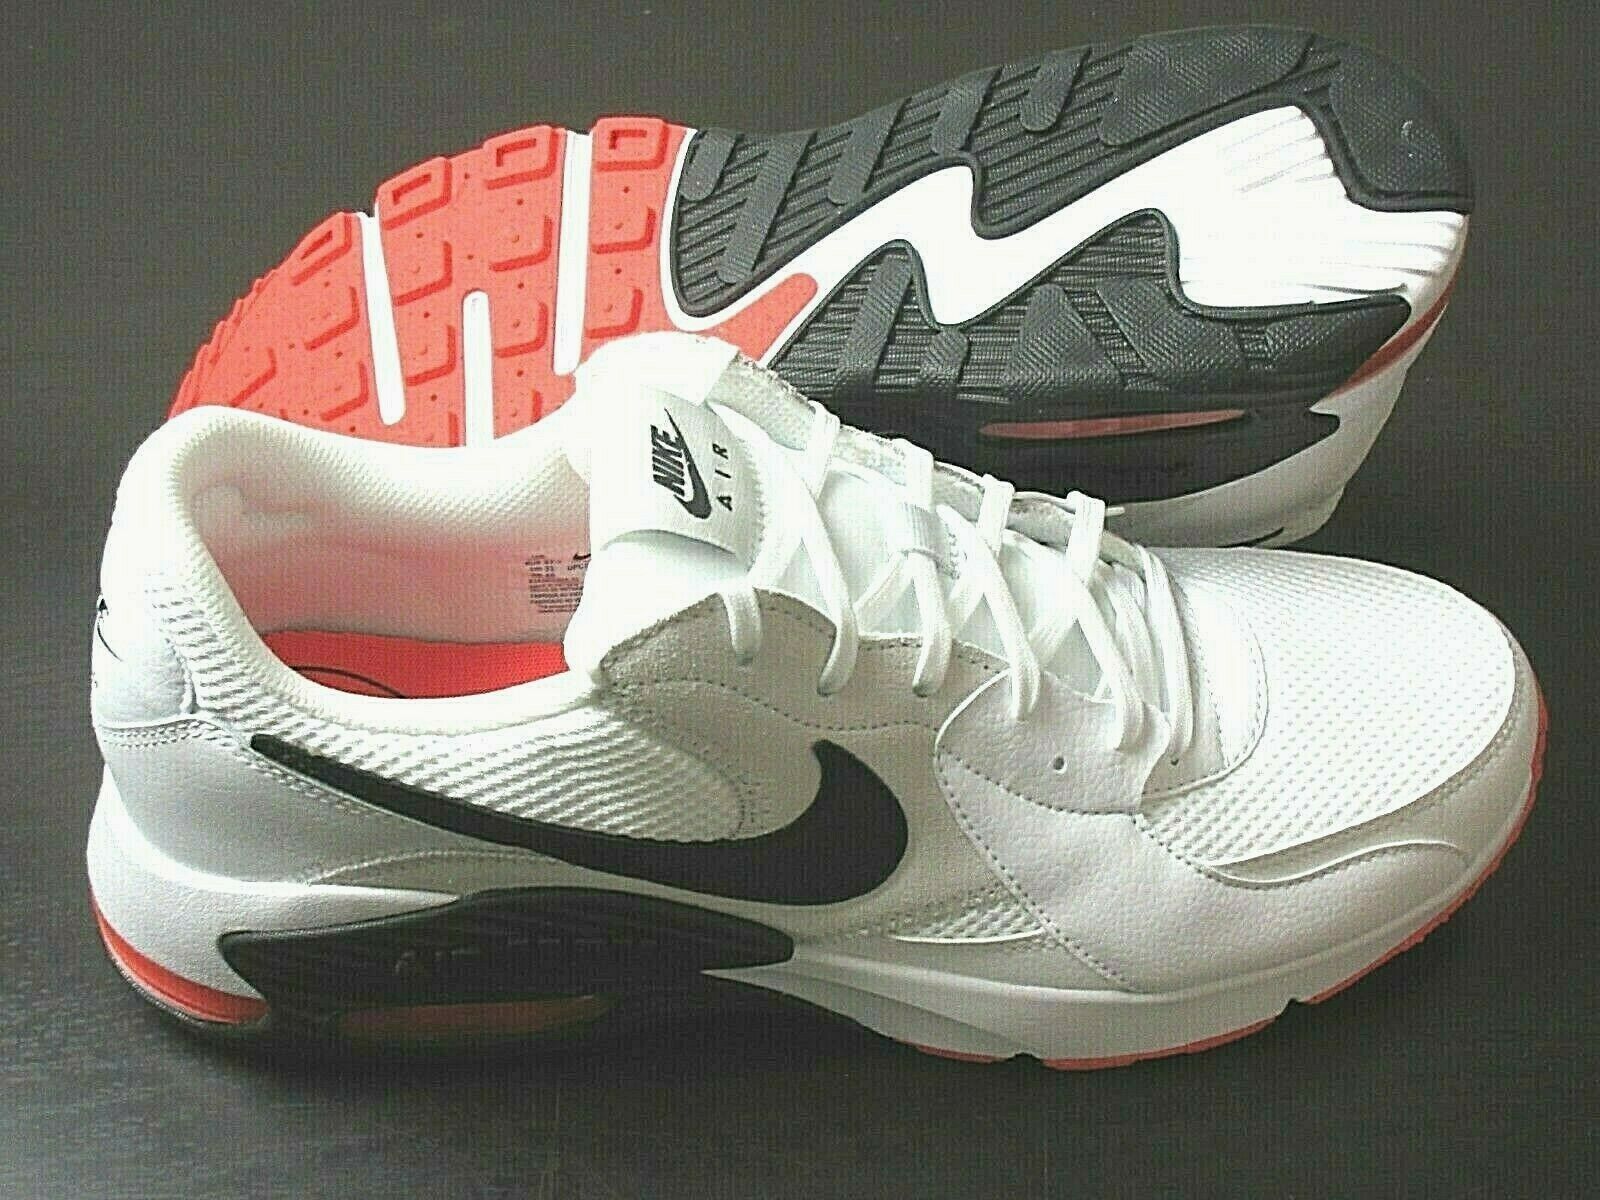 Nike Mens Air Max Excee Running Training Shoes White Black Photon Size 13 NEW